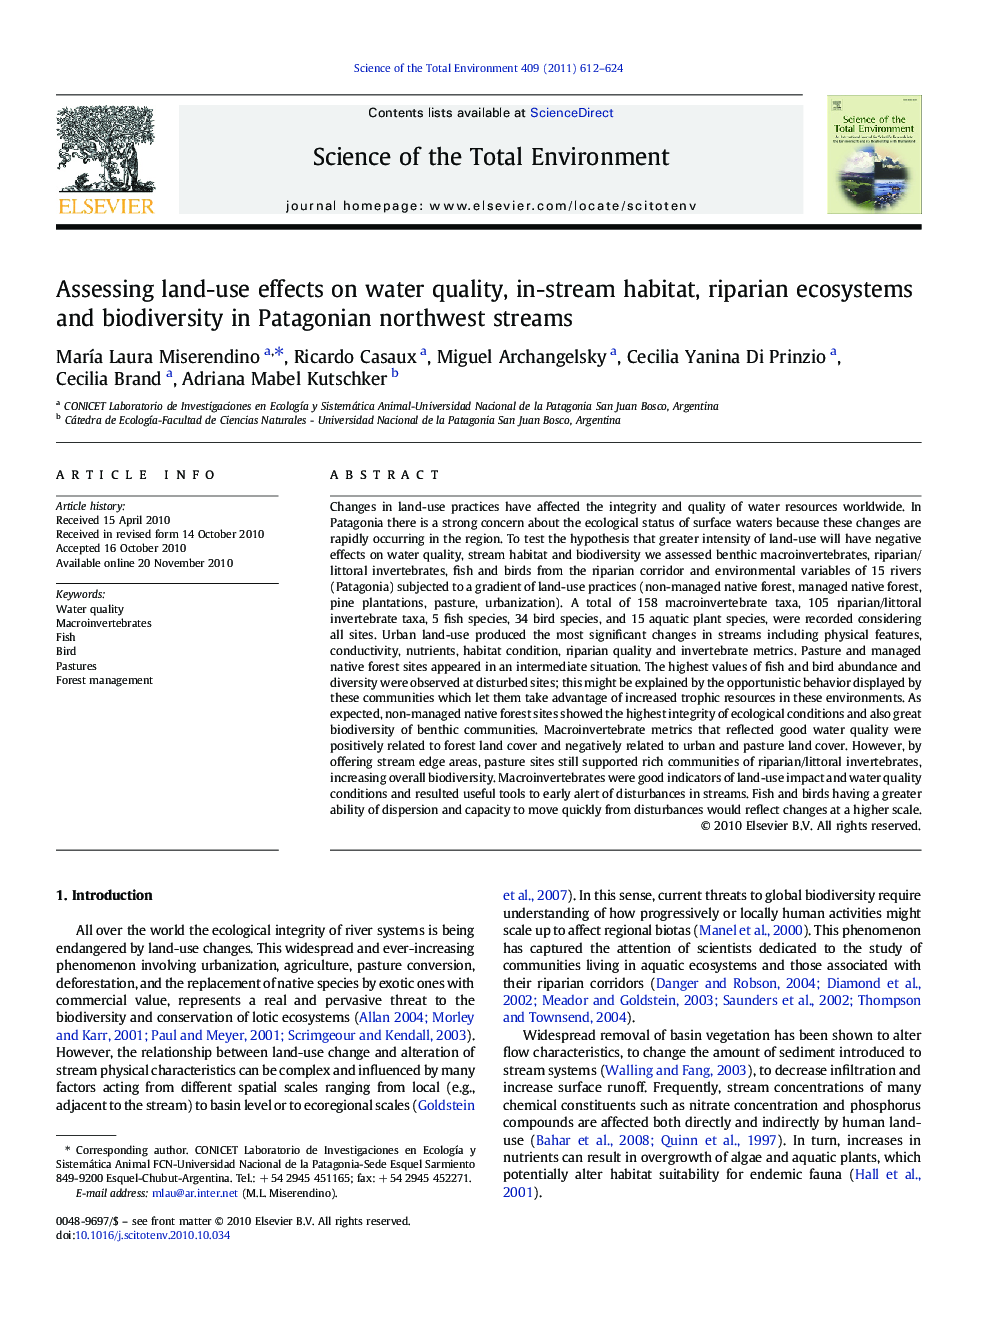 Assessing land-use effects on water quality, in-stream habitat, riparian ecosystems and biodiversity in Patagonian northwest streams